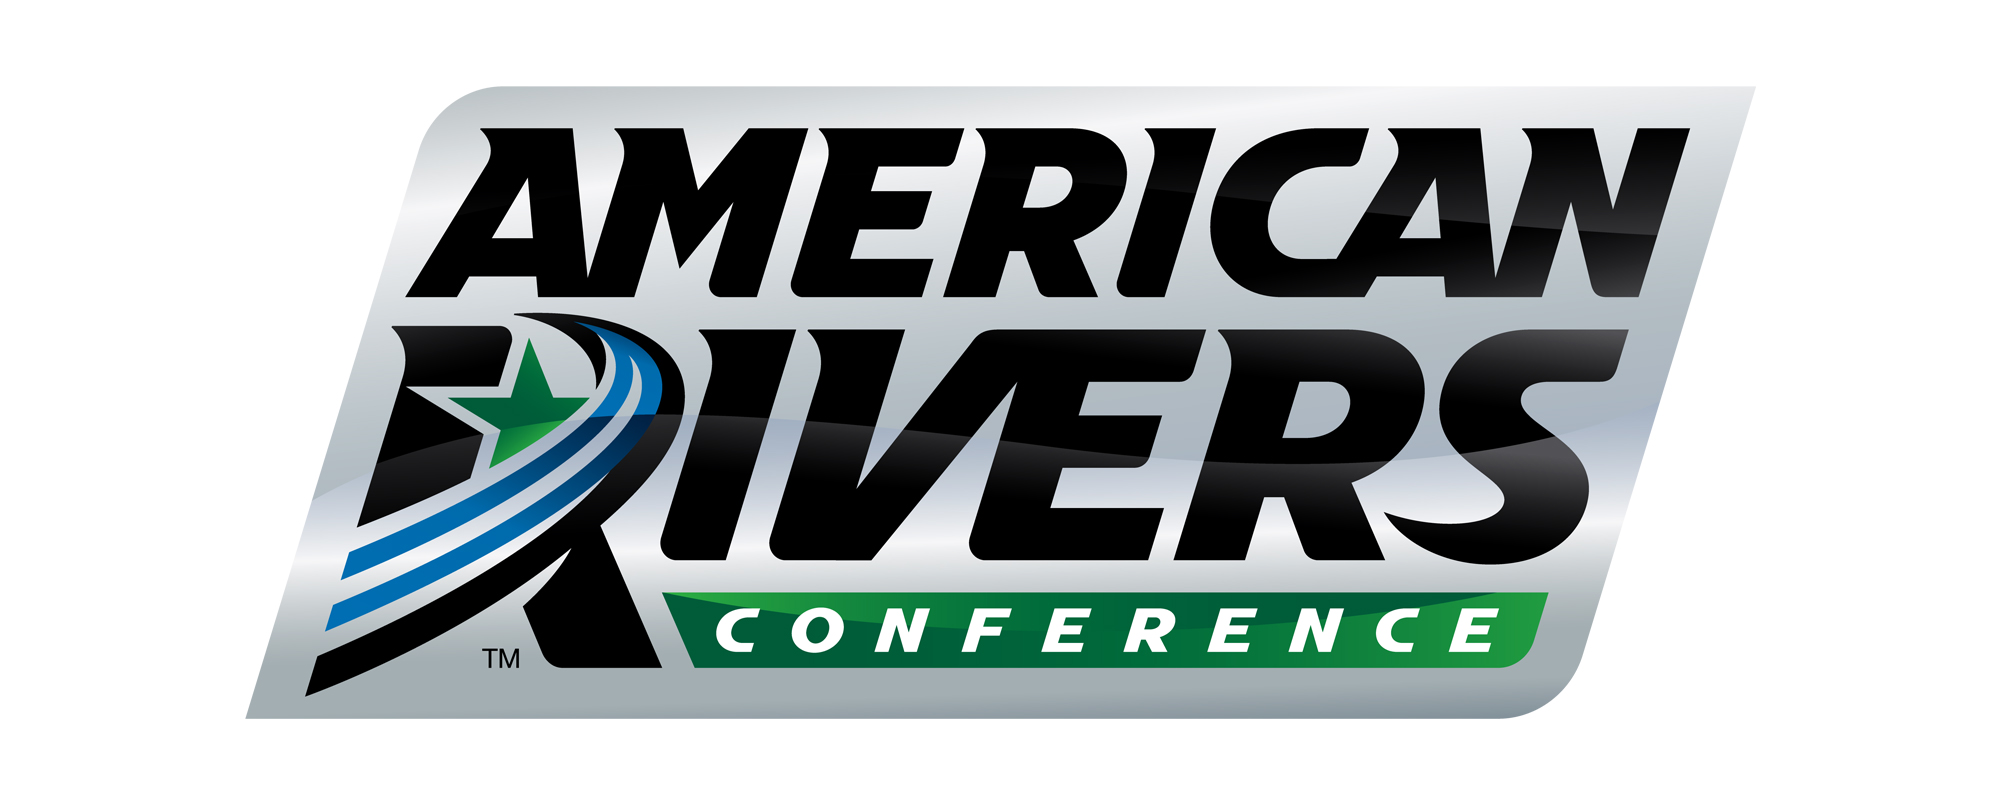 #RiversRise; Iowa Conference now American Rivers Conference